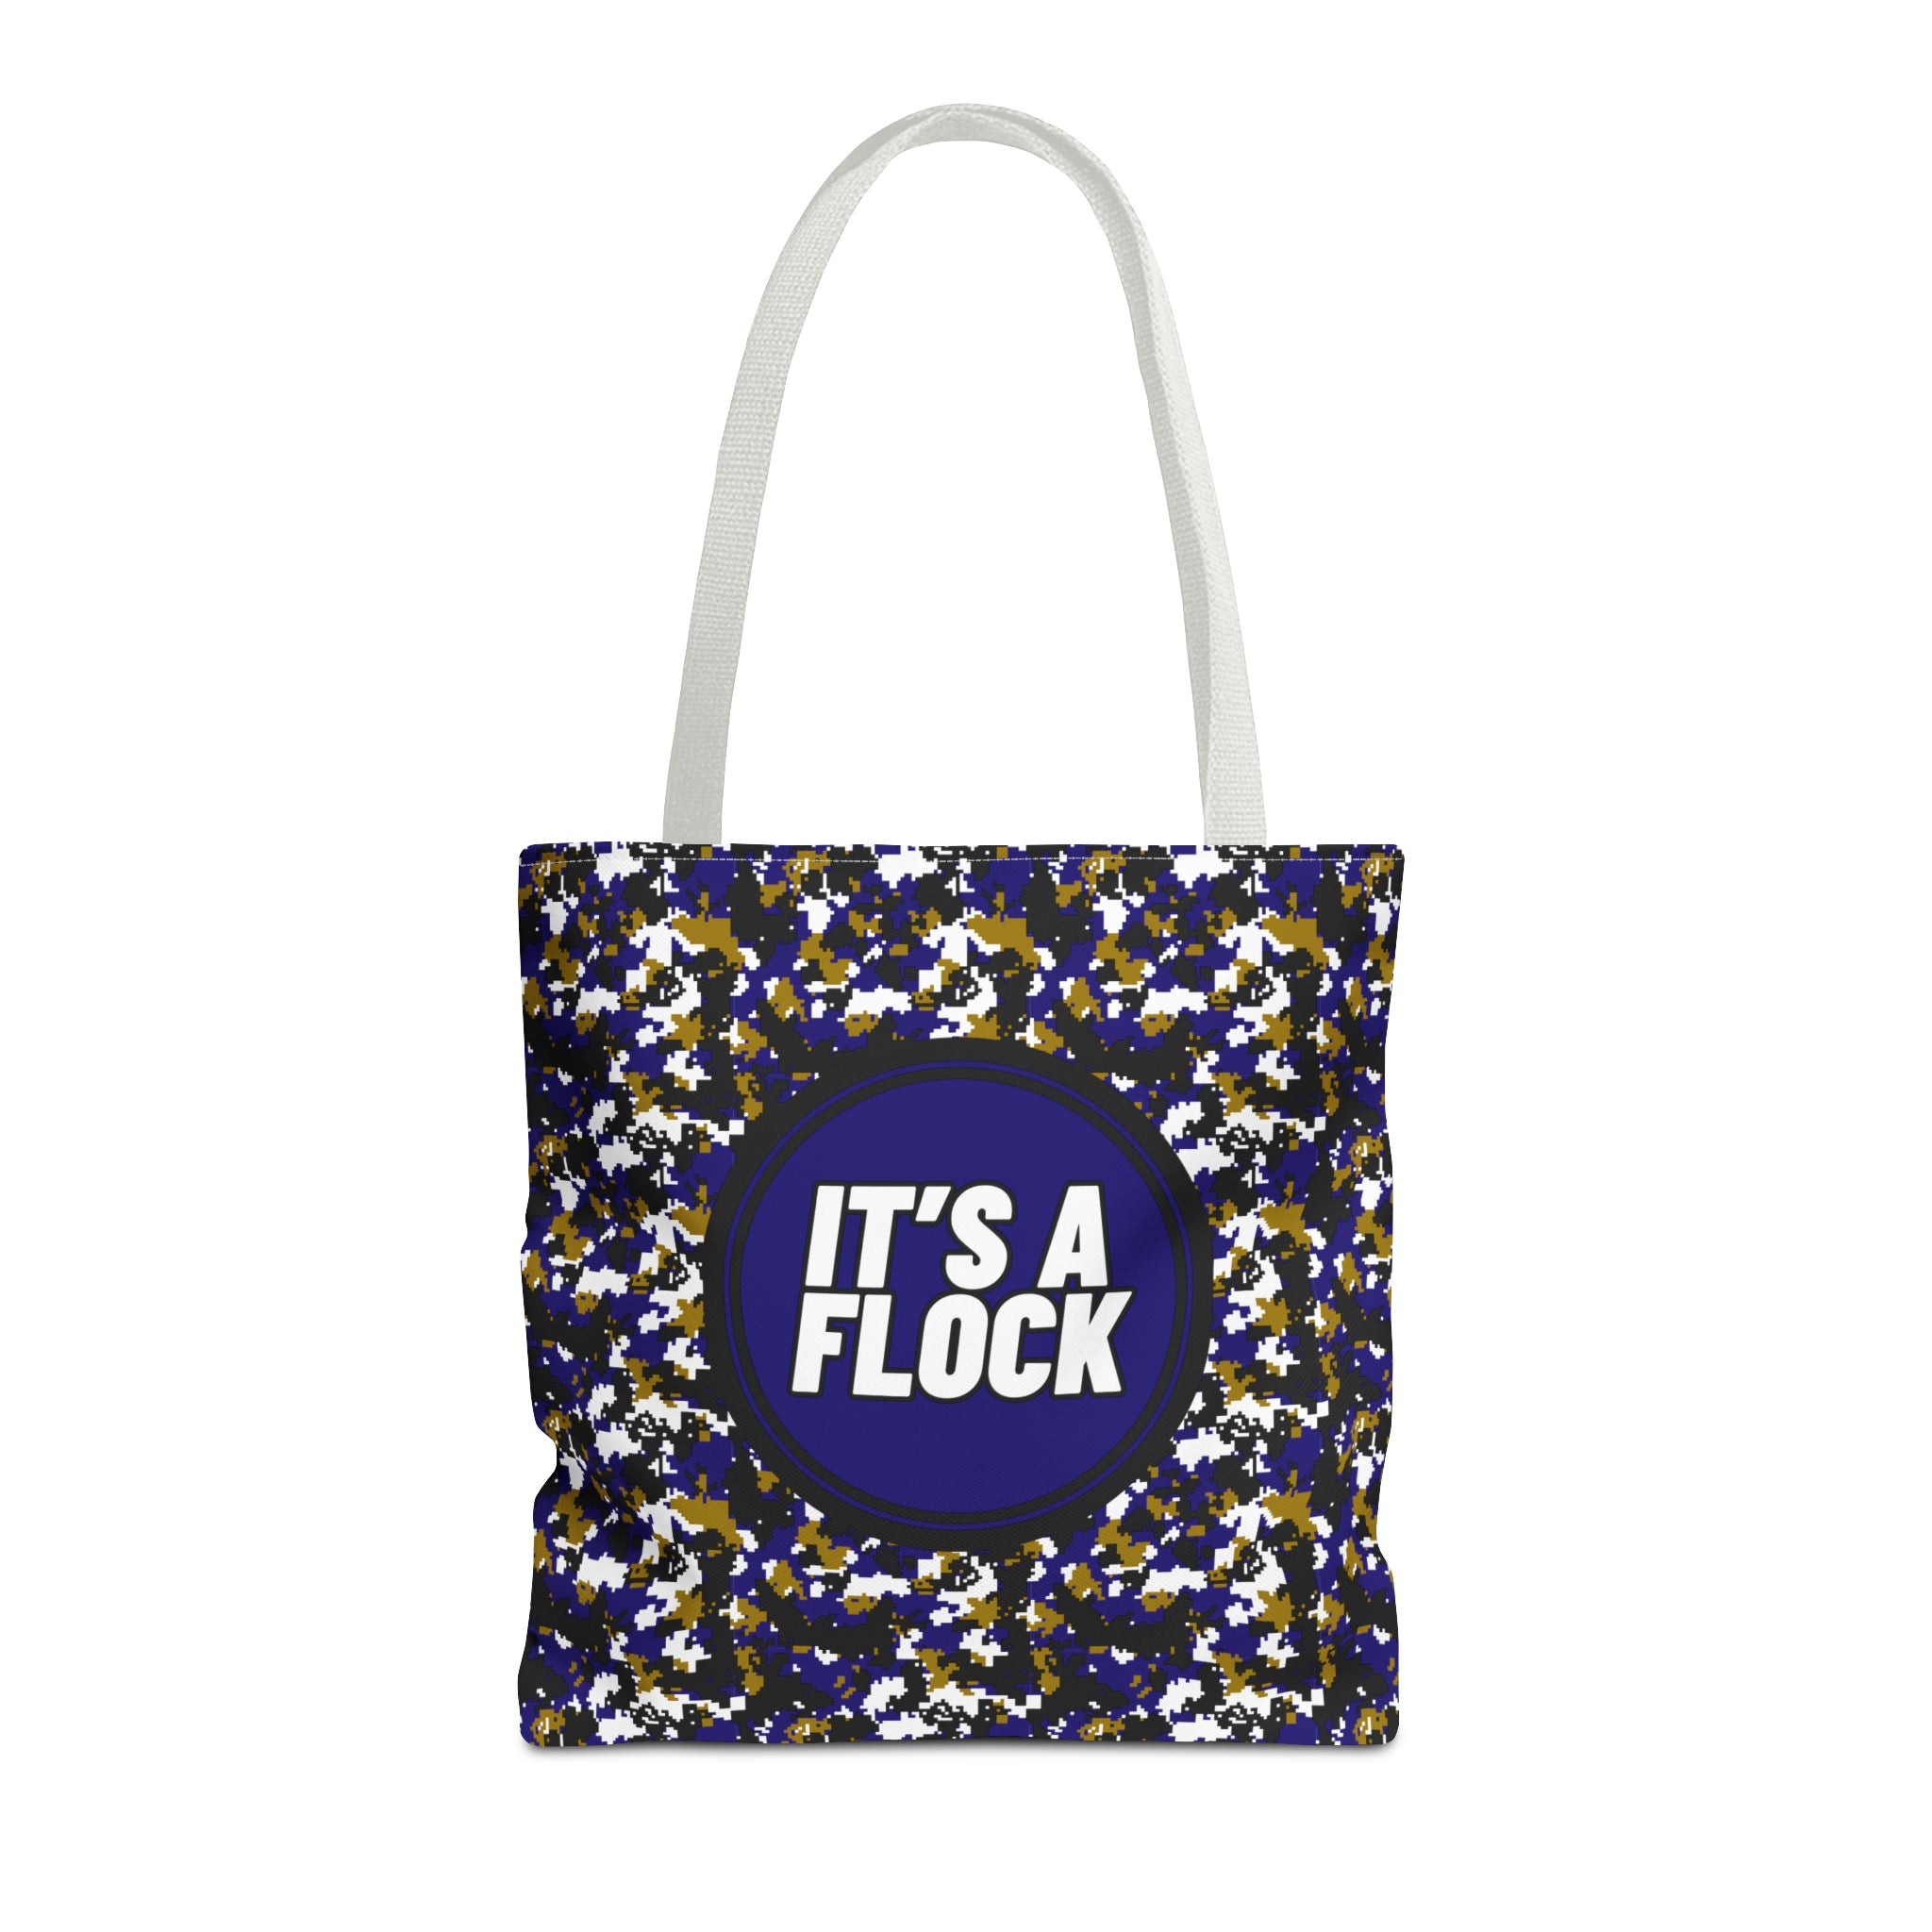 It's a Flock Shopping Tote for Baltimore Sports Fans | Baltimore Flock Utility Bag